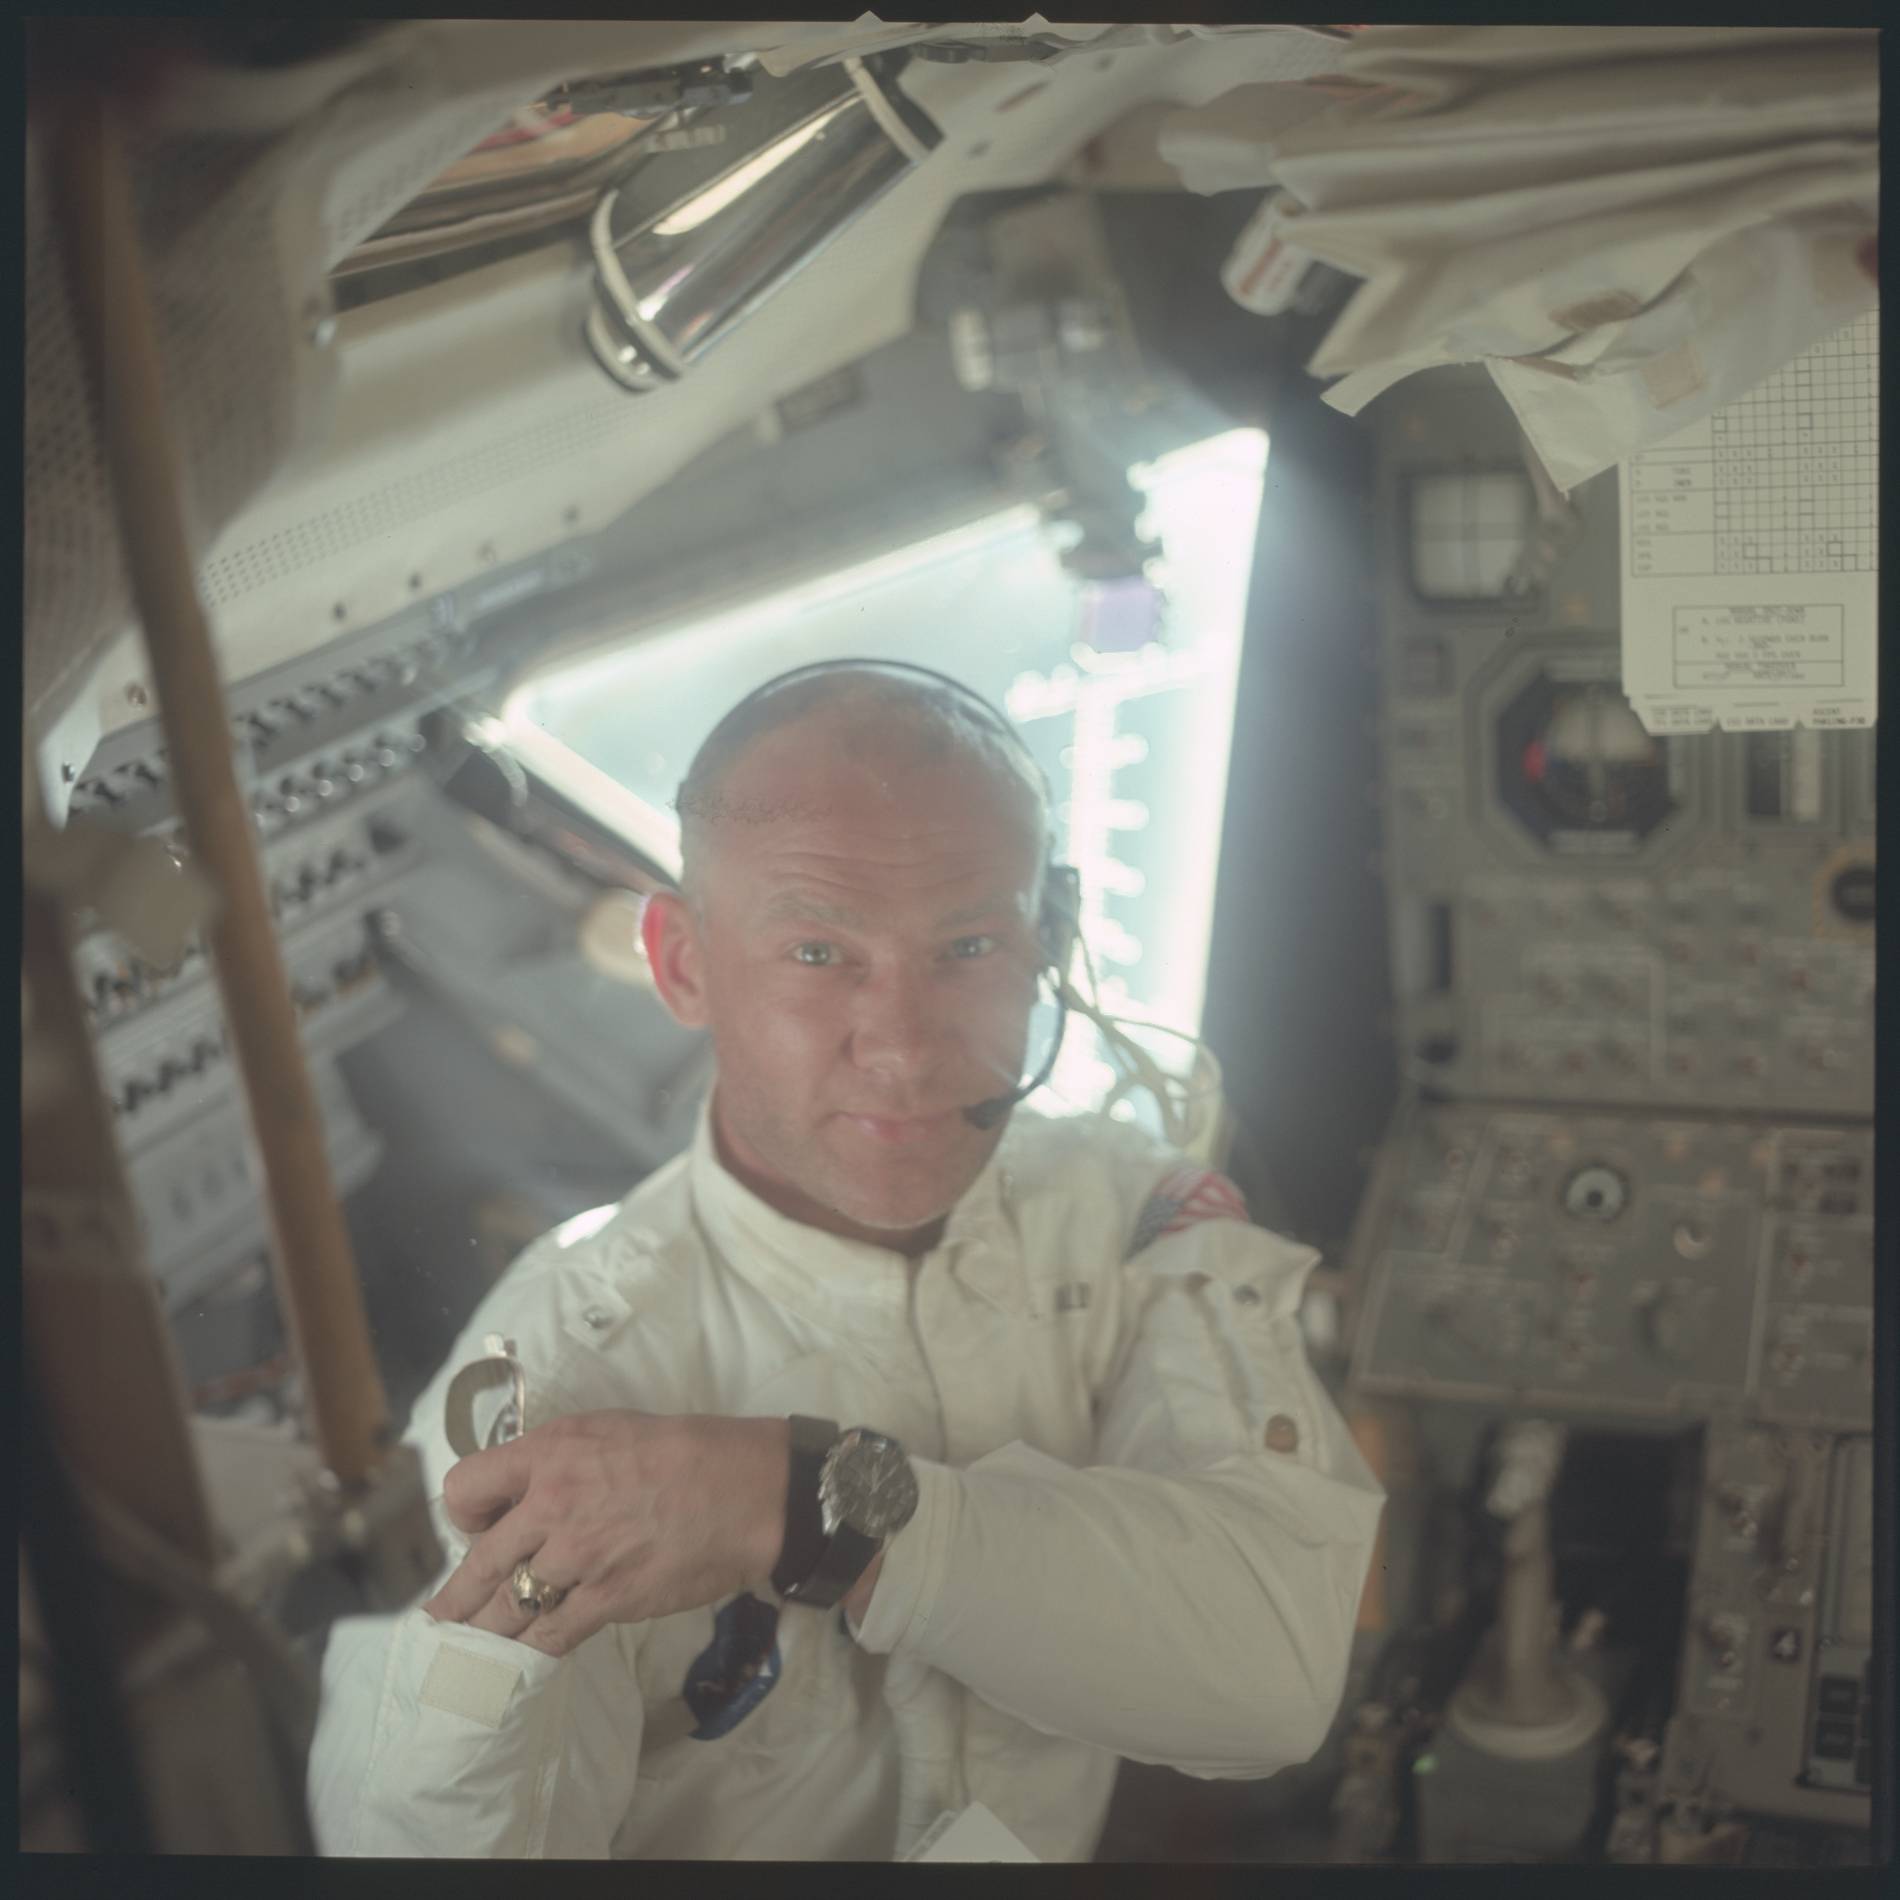 buzz aldrin in space during the apollo 11 mission